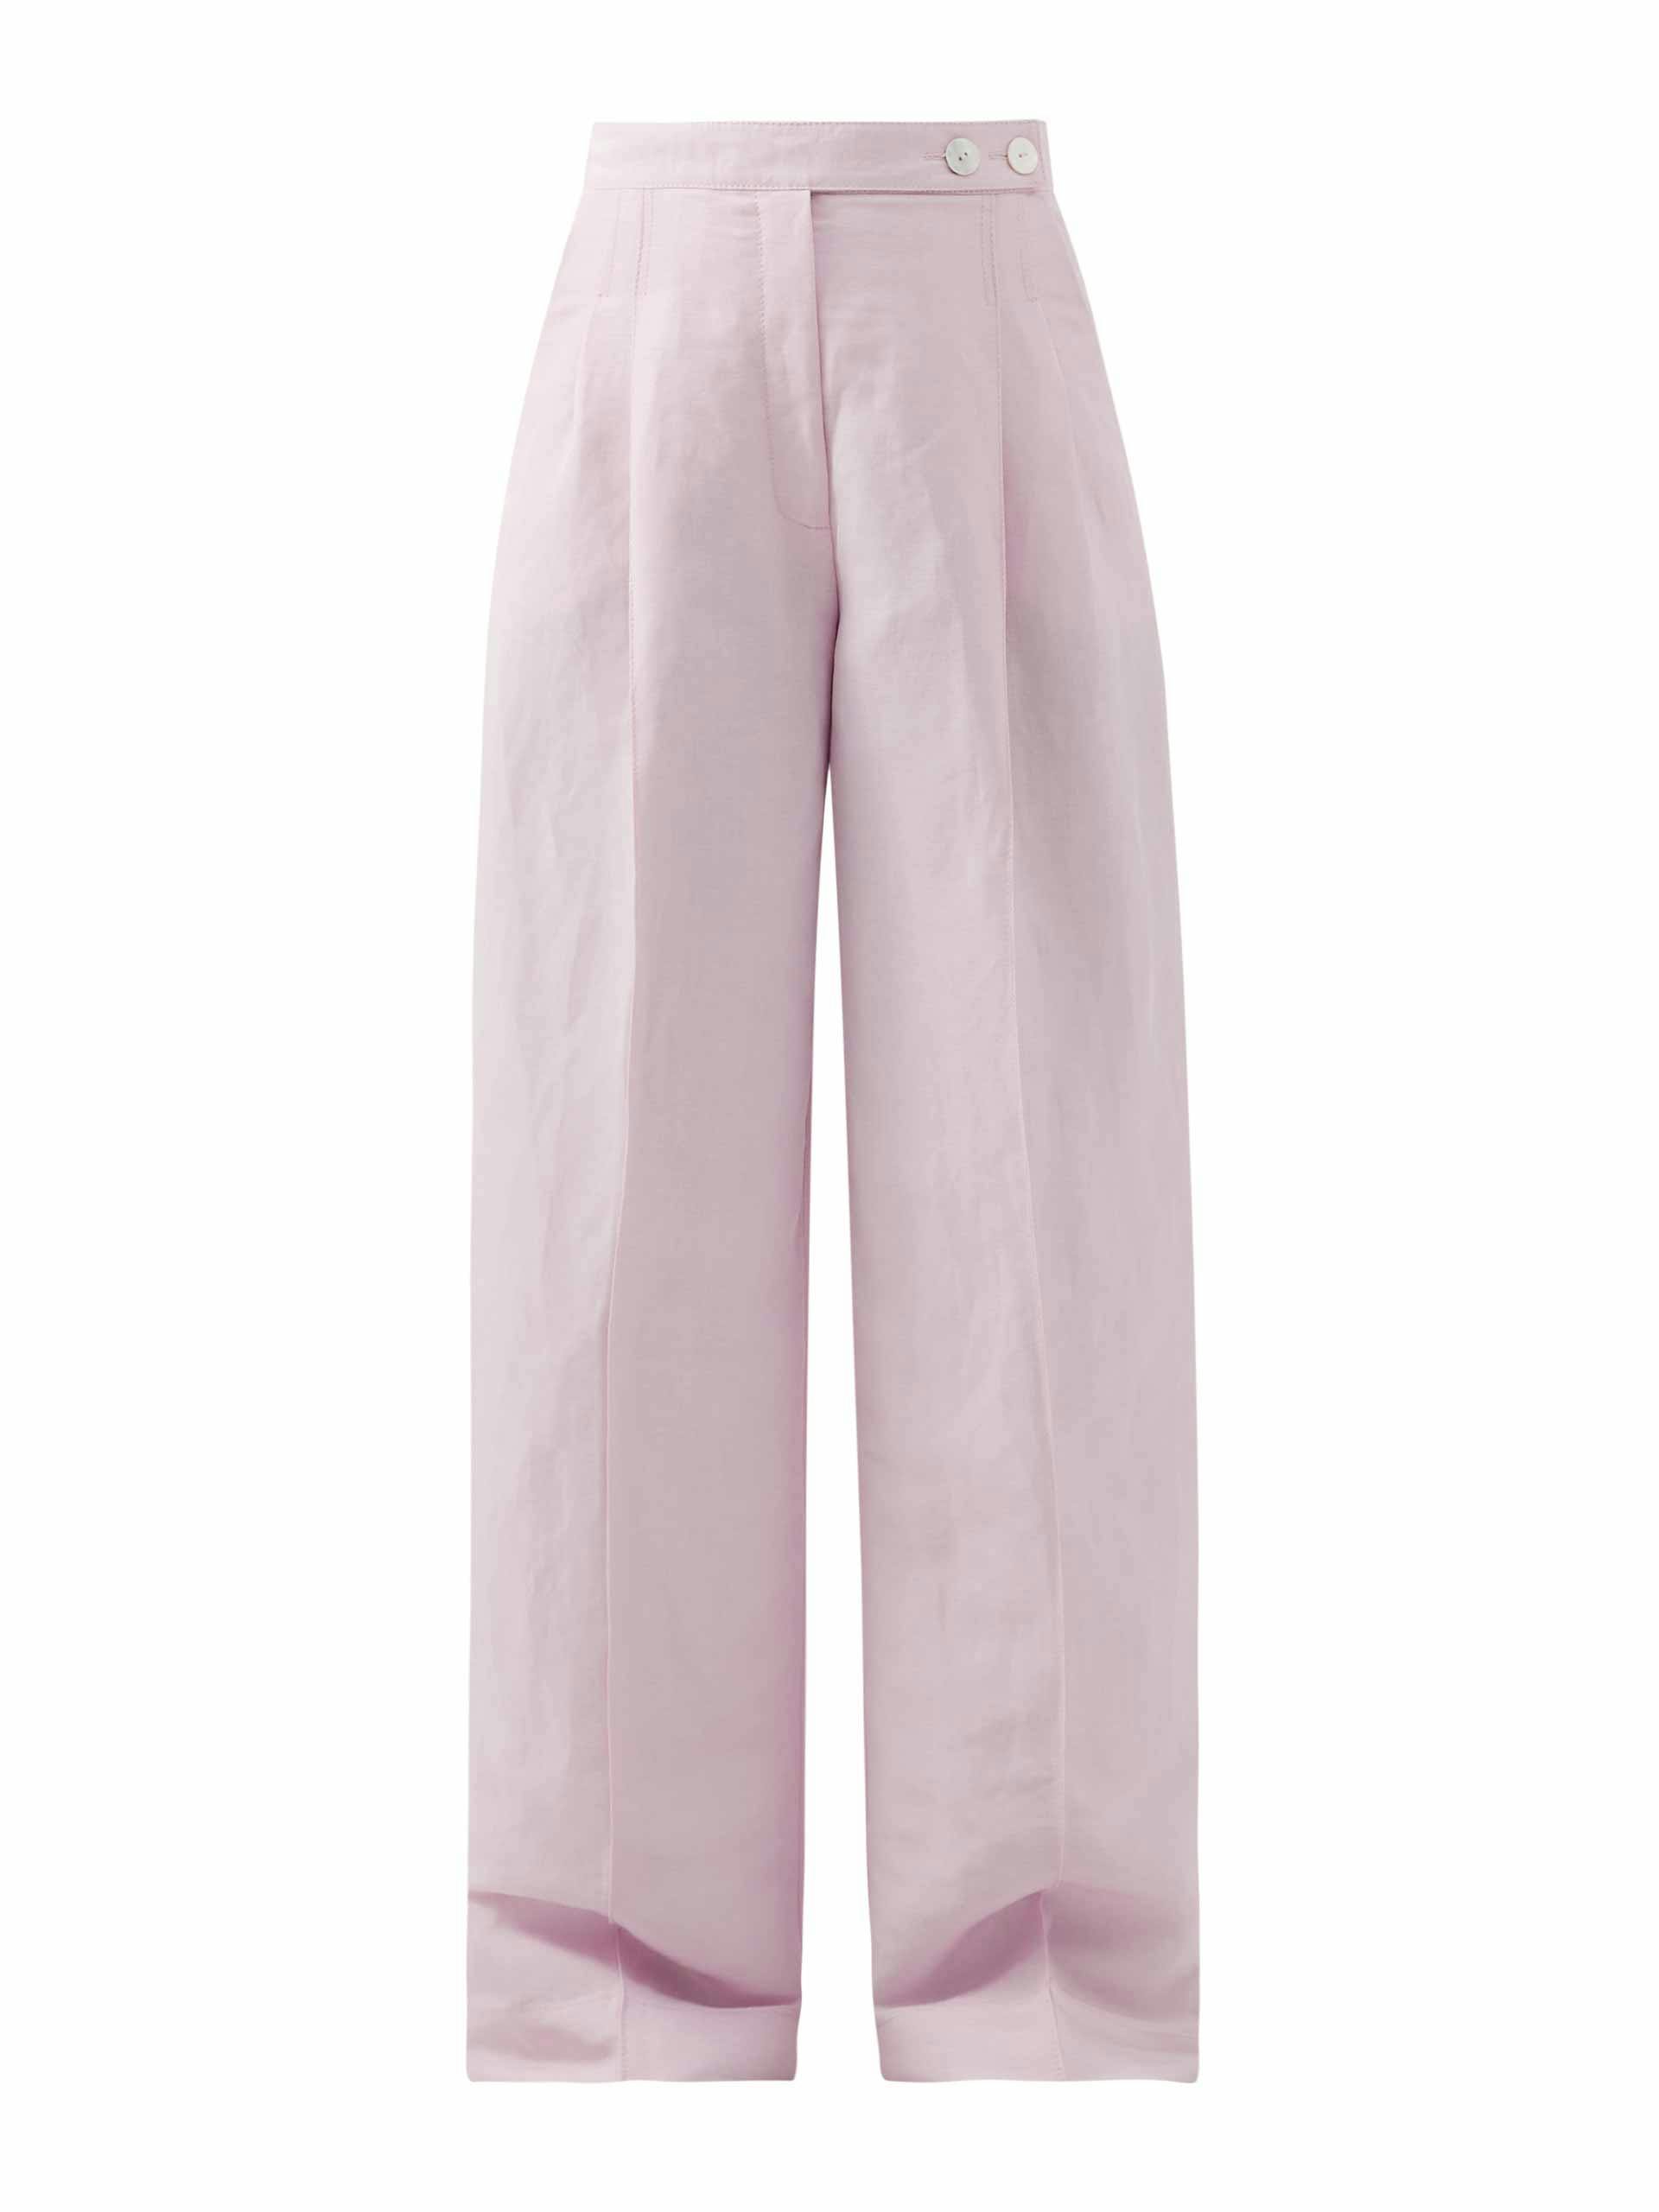 Pink pleated linen trousers